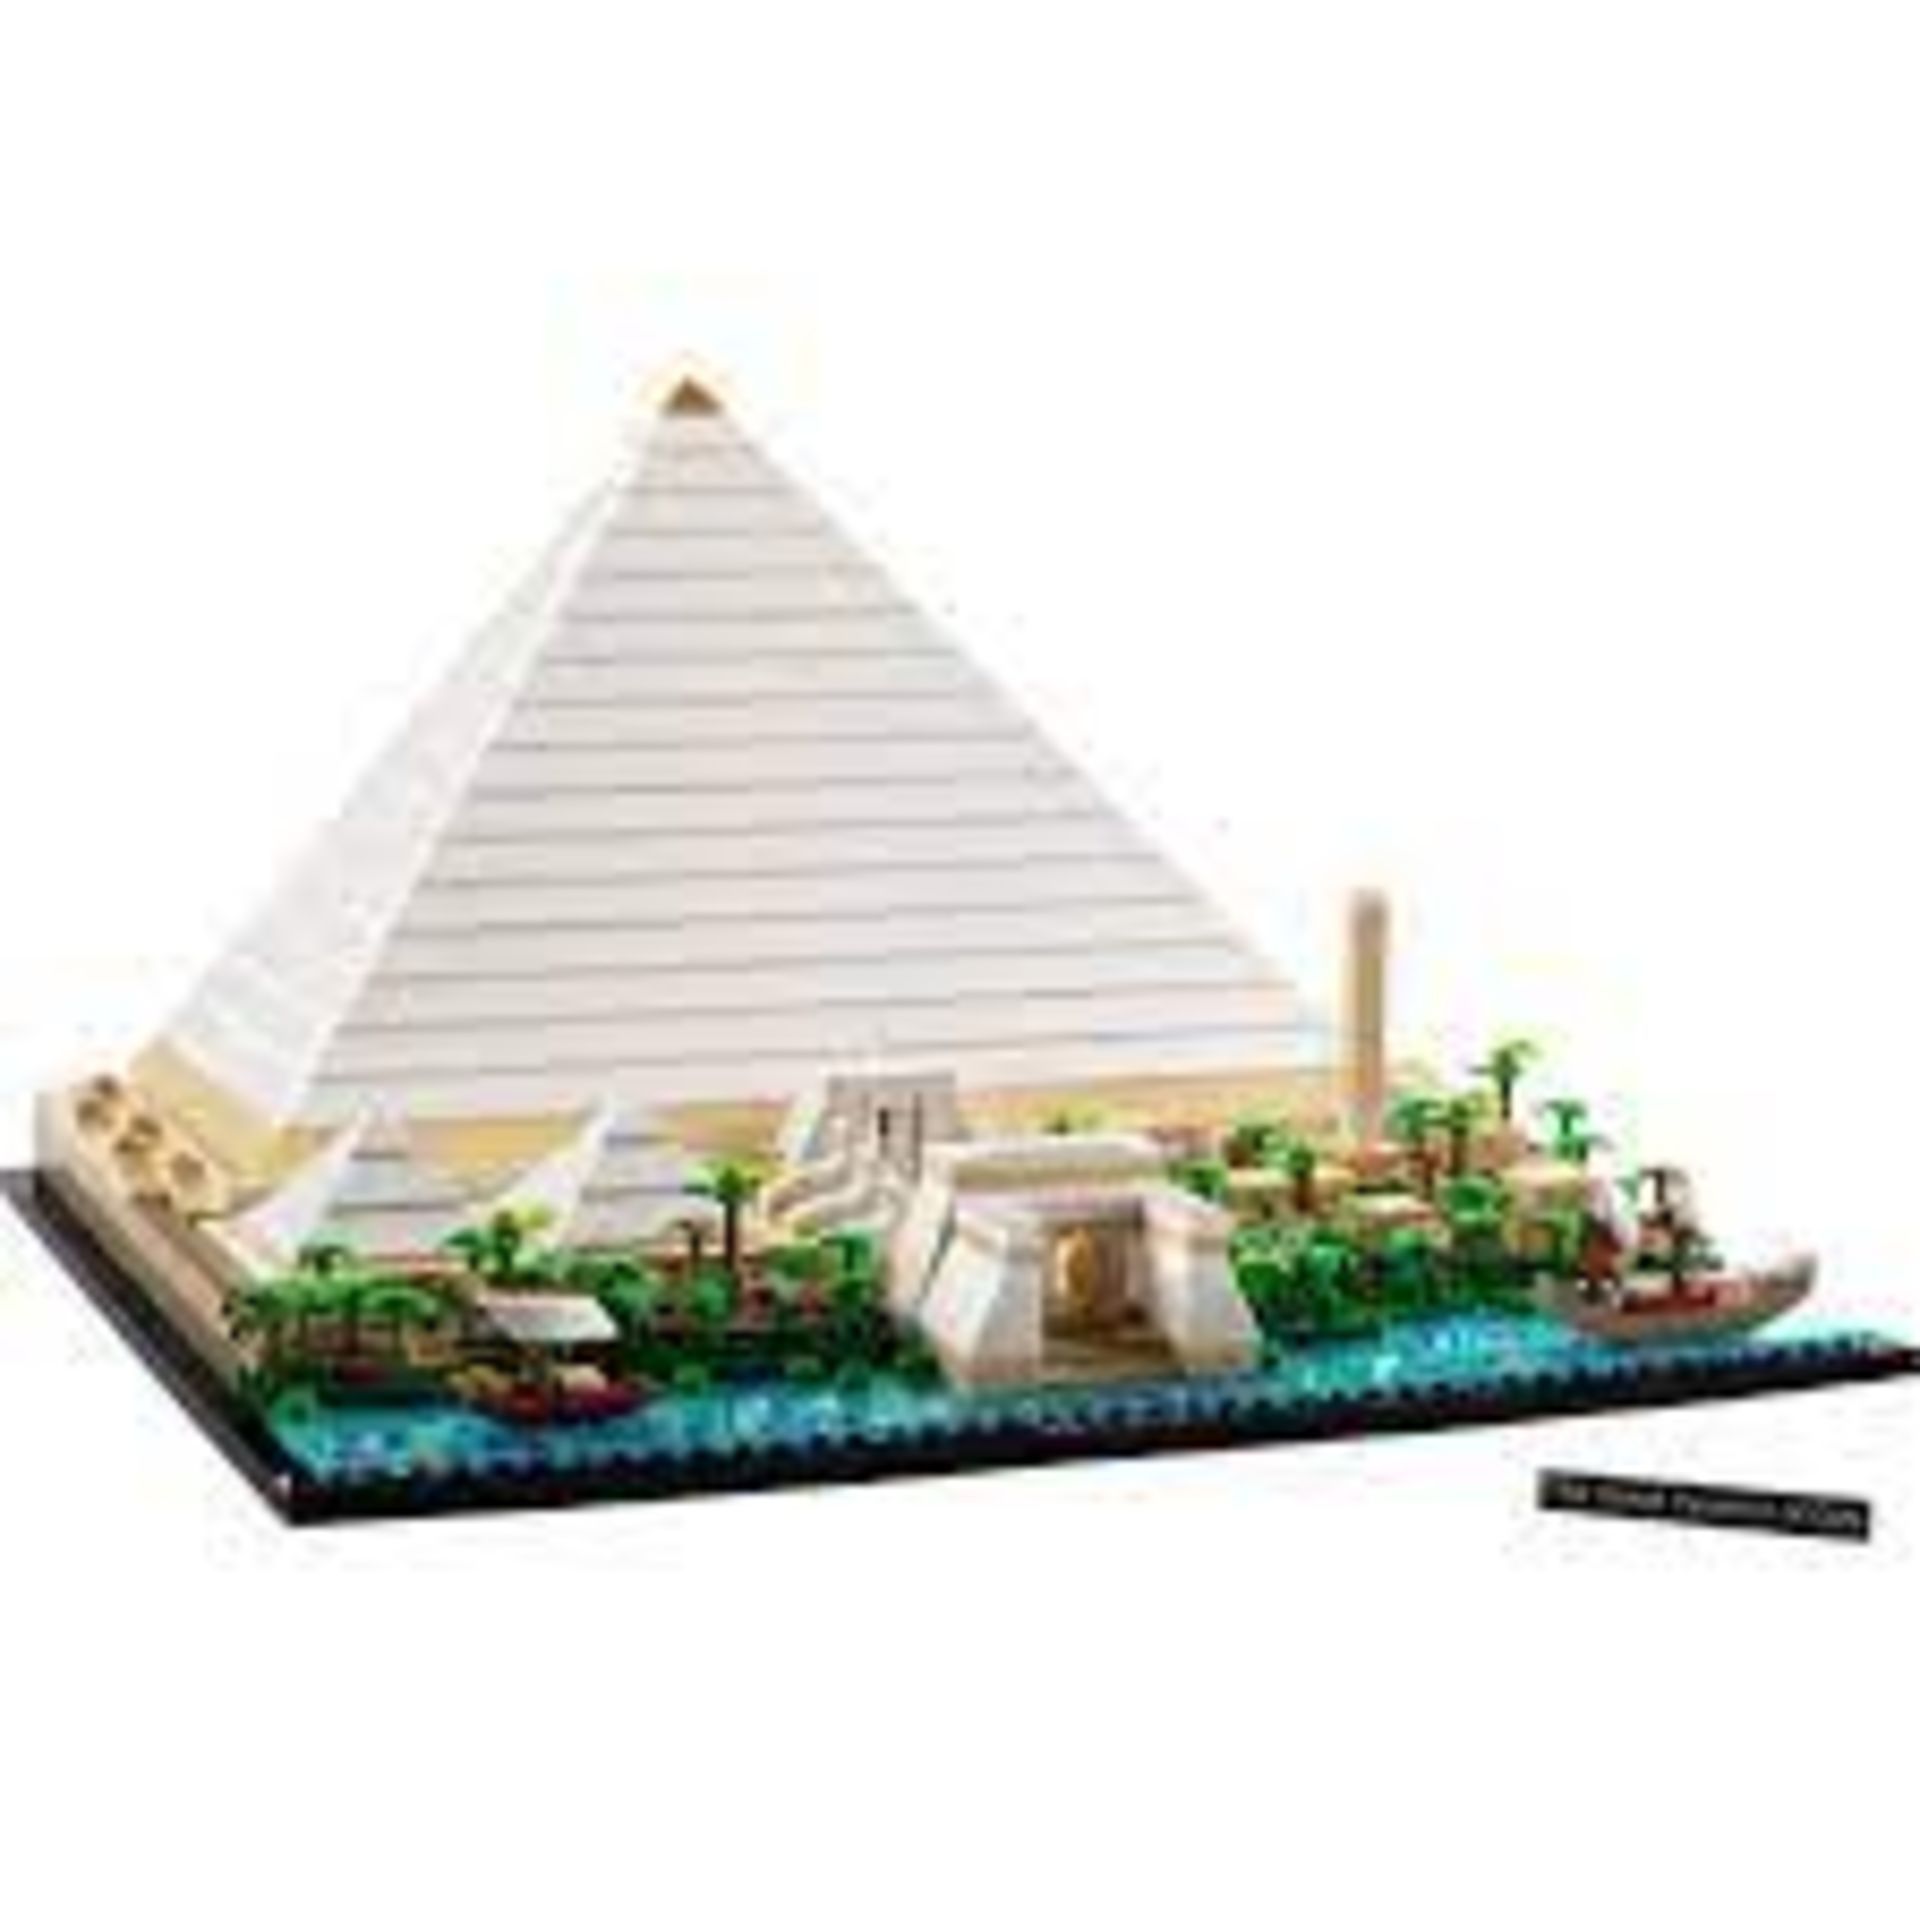 LEGO Architecture 21058 Great Pyramid of Giza. RRP £199.99. - SR4. Build a beautifully detailed